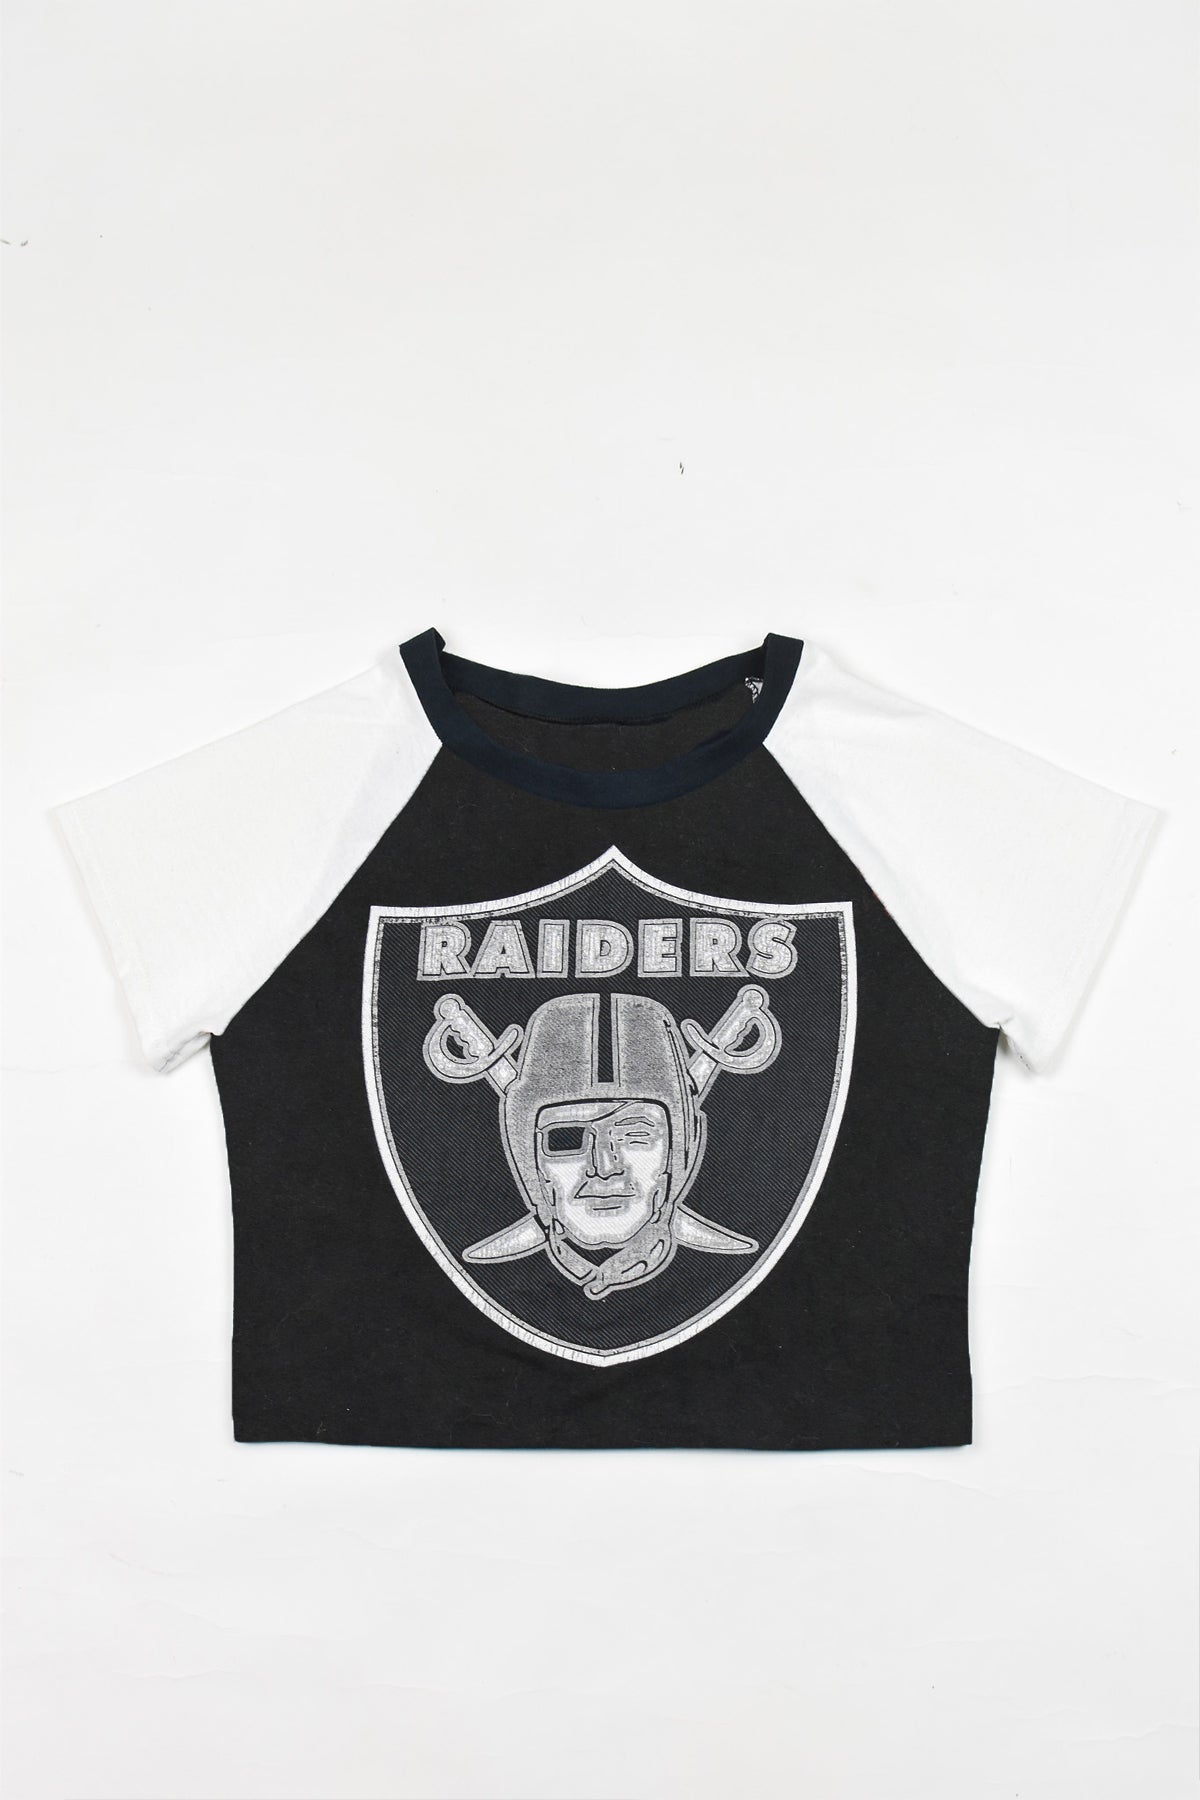 Upcycled Raiders Baby Tee *MADE TO ORDER*